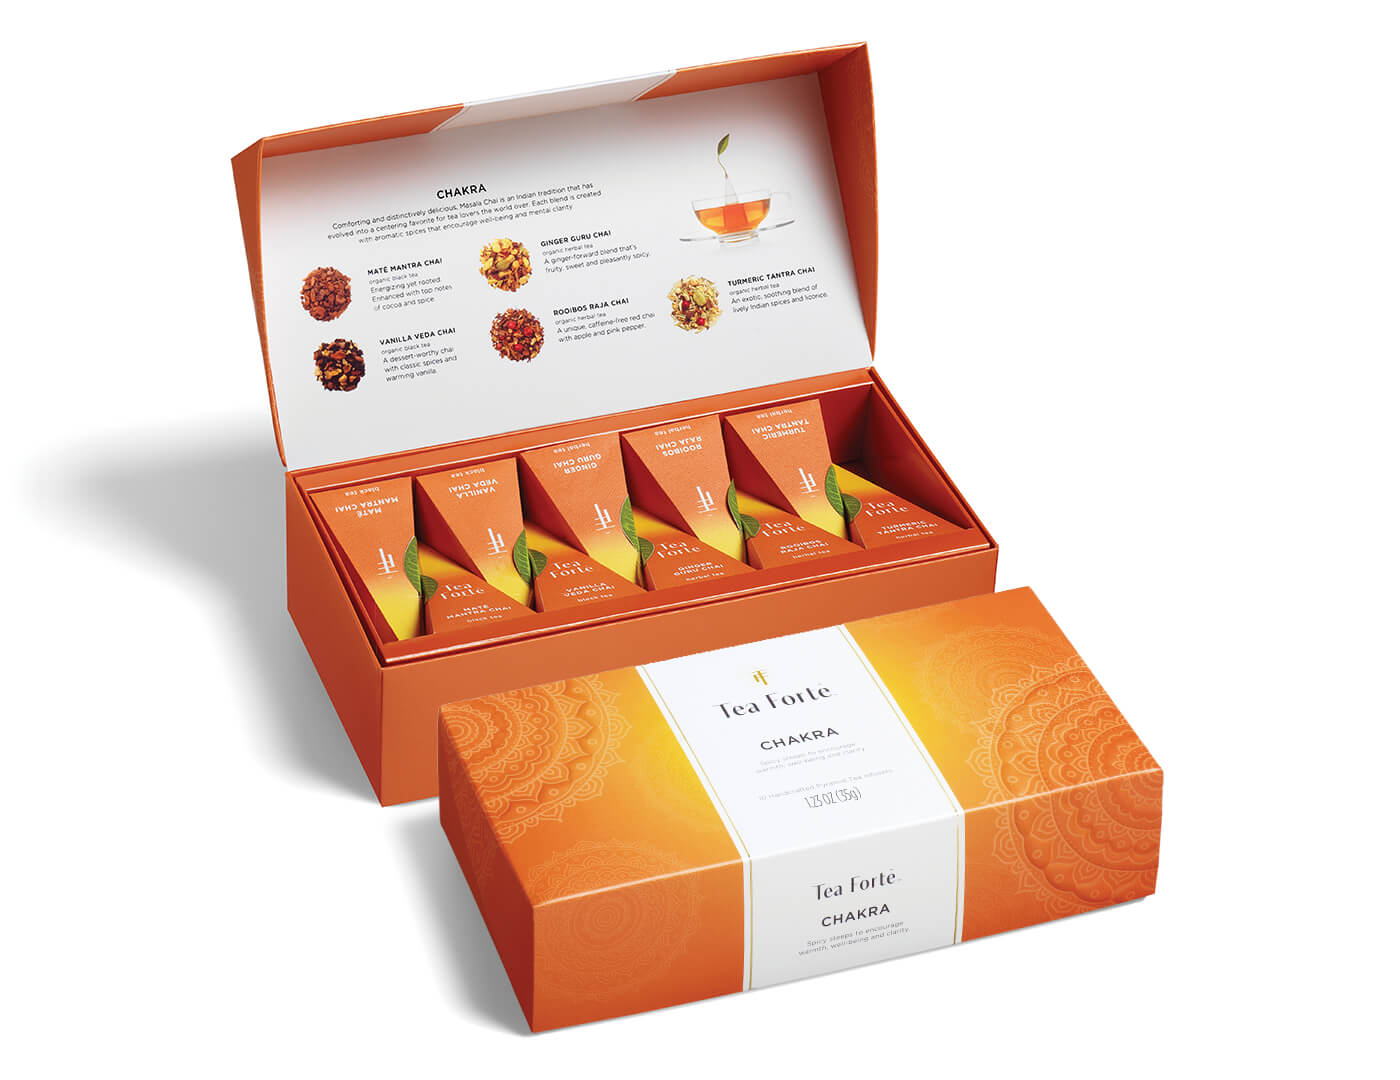 Chakra tea assortment in a 10 count petite presentation box with lid open and closed